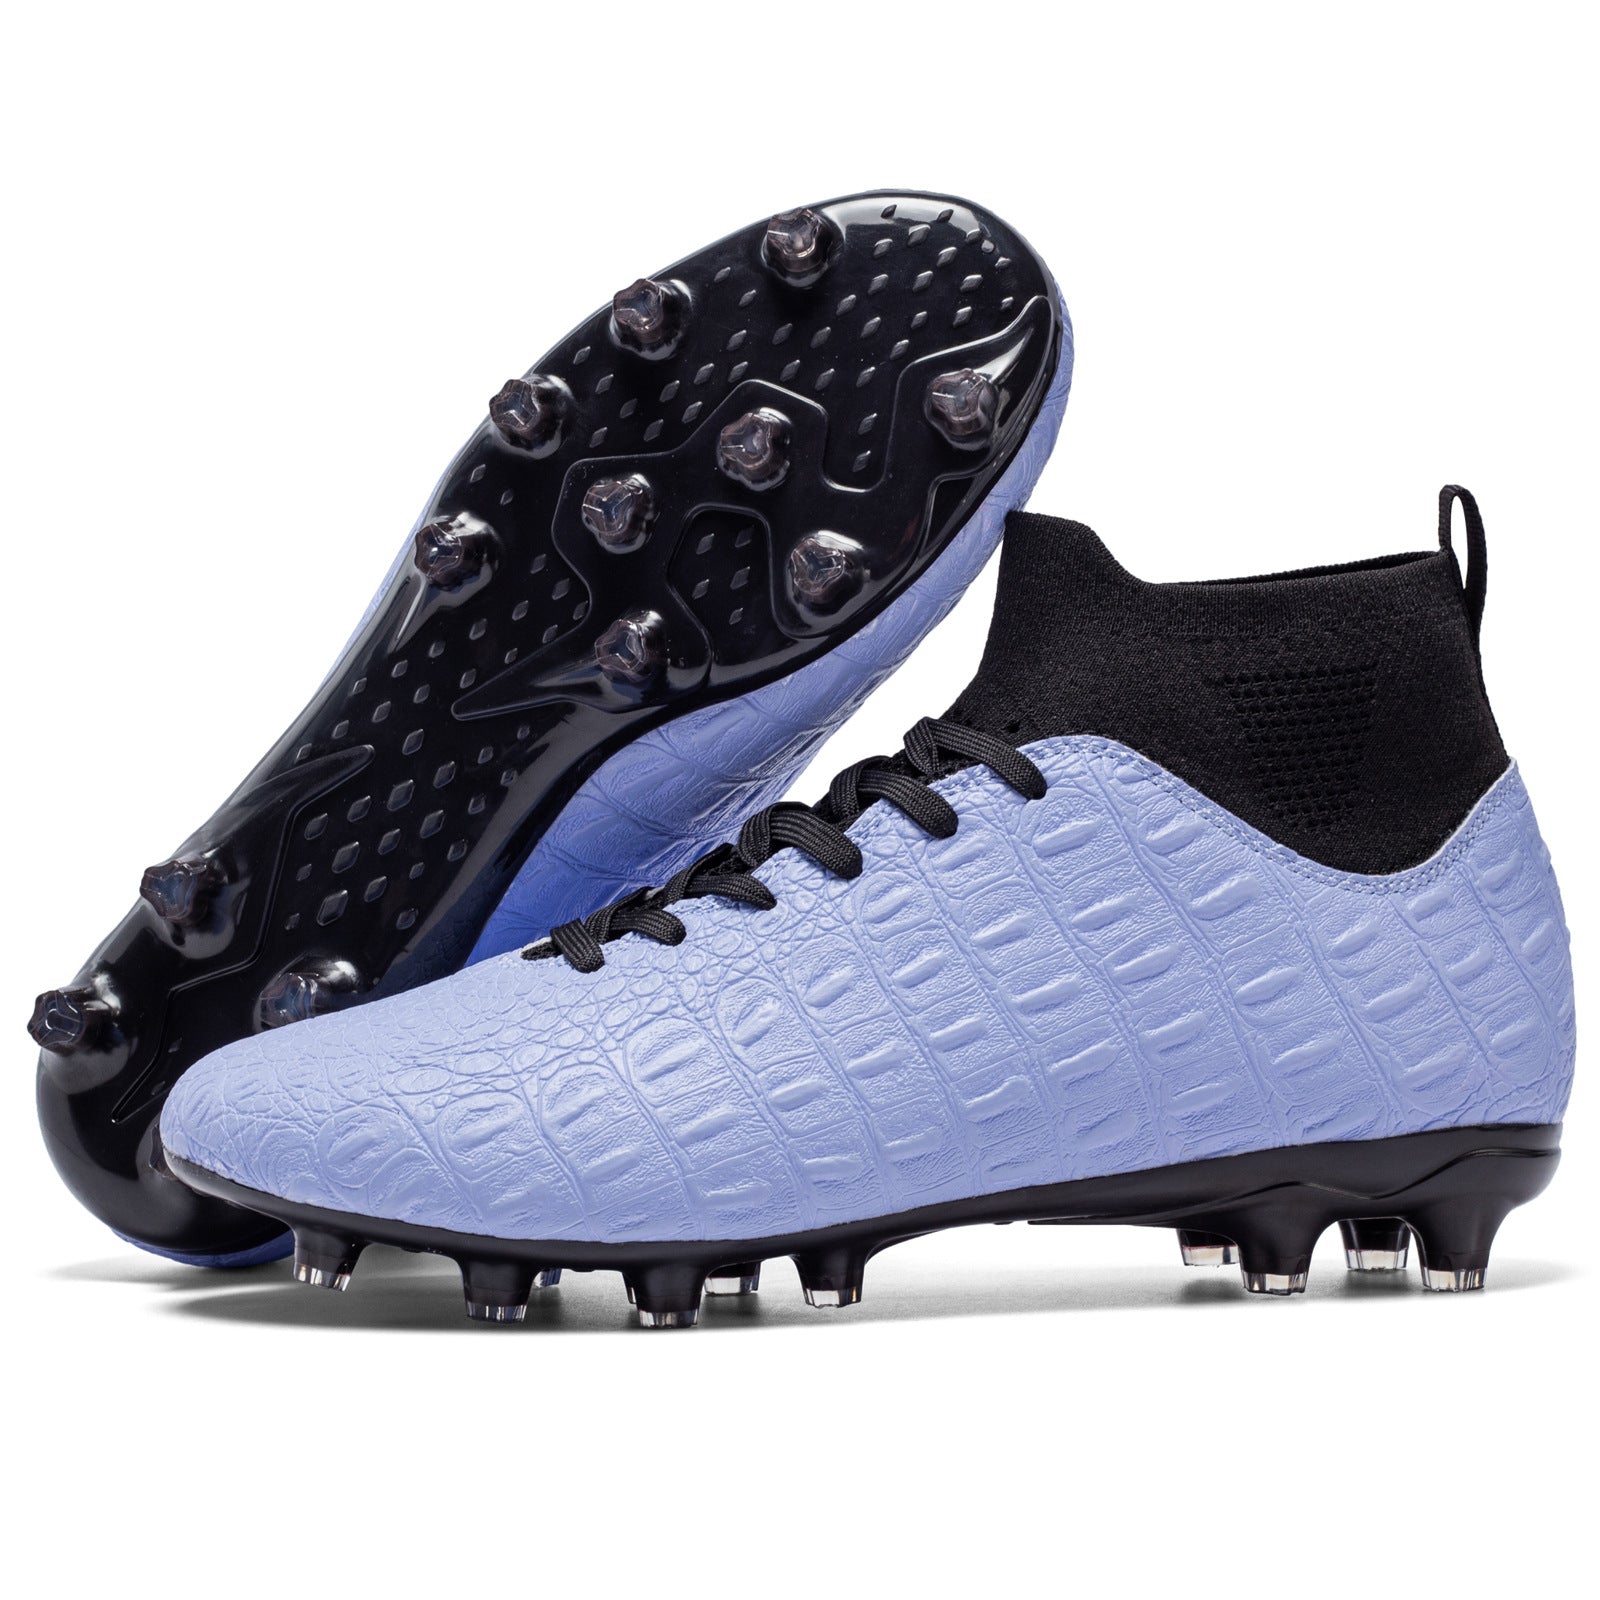 Score Big: Premium Soccer Shoes for Victory